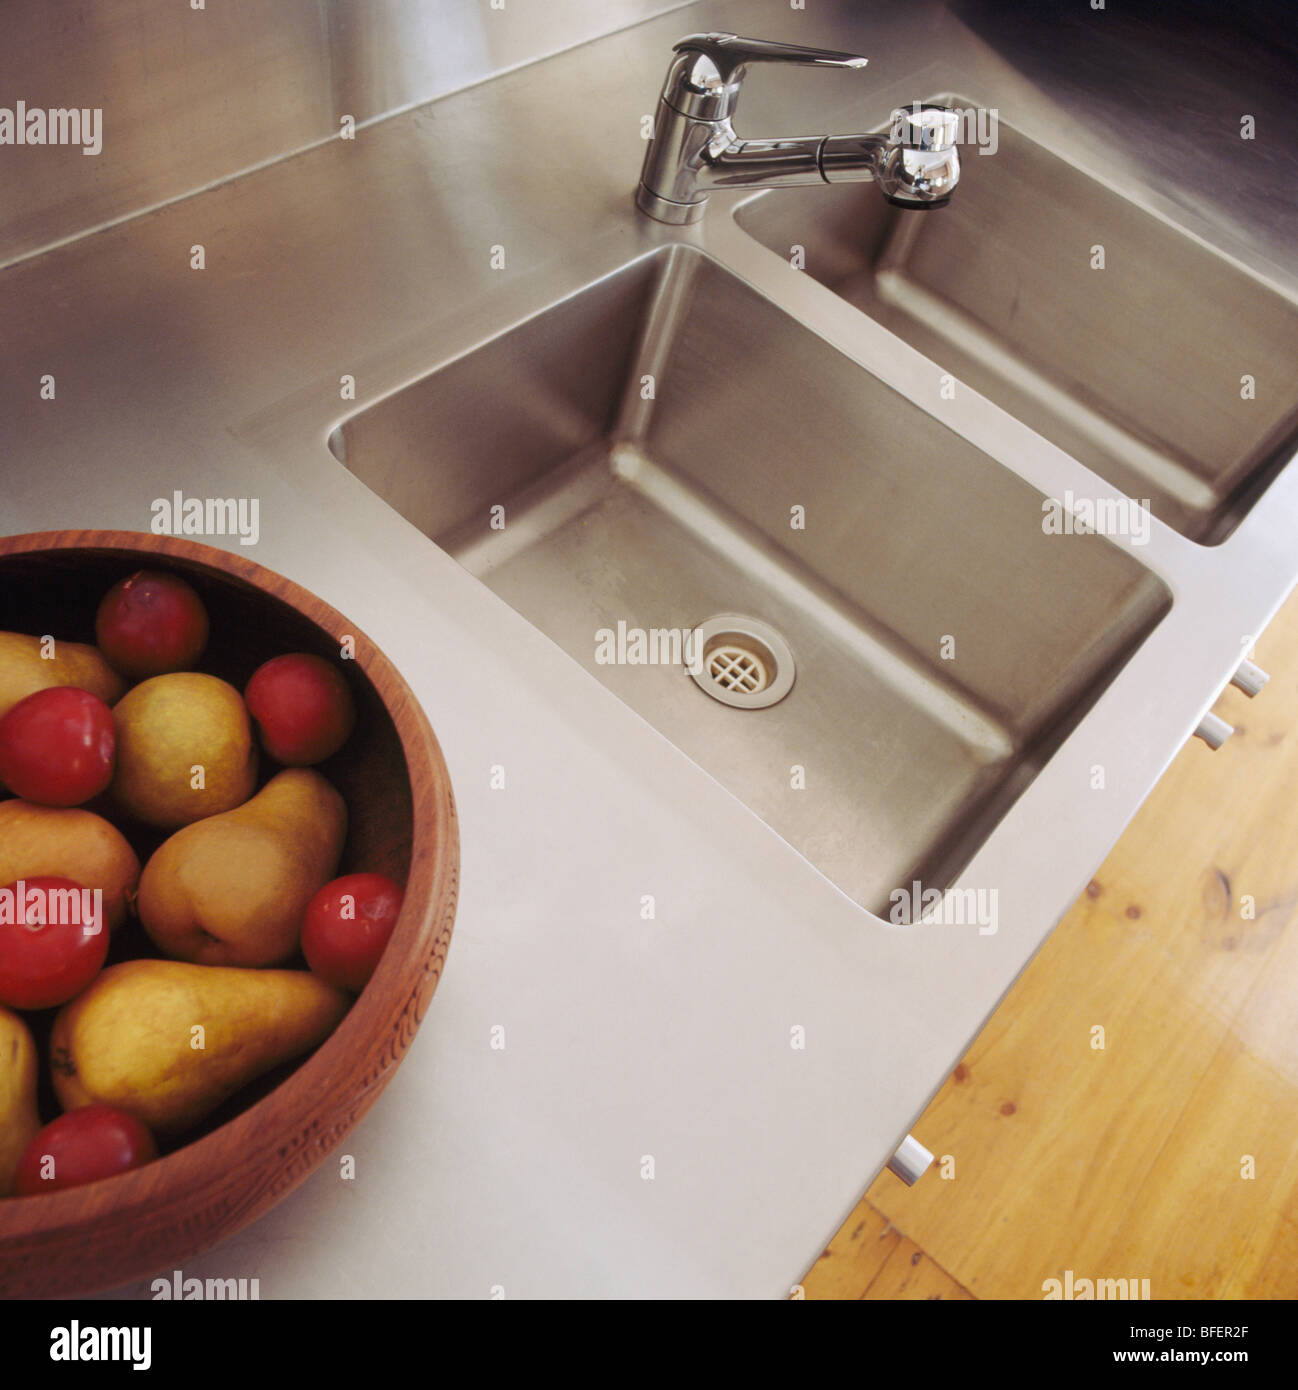 Close-up of double stainless steel sinks Stock Photo